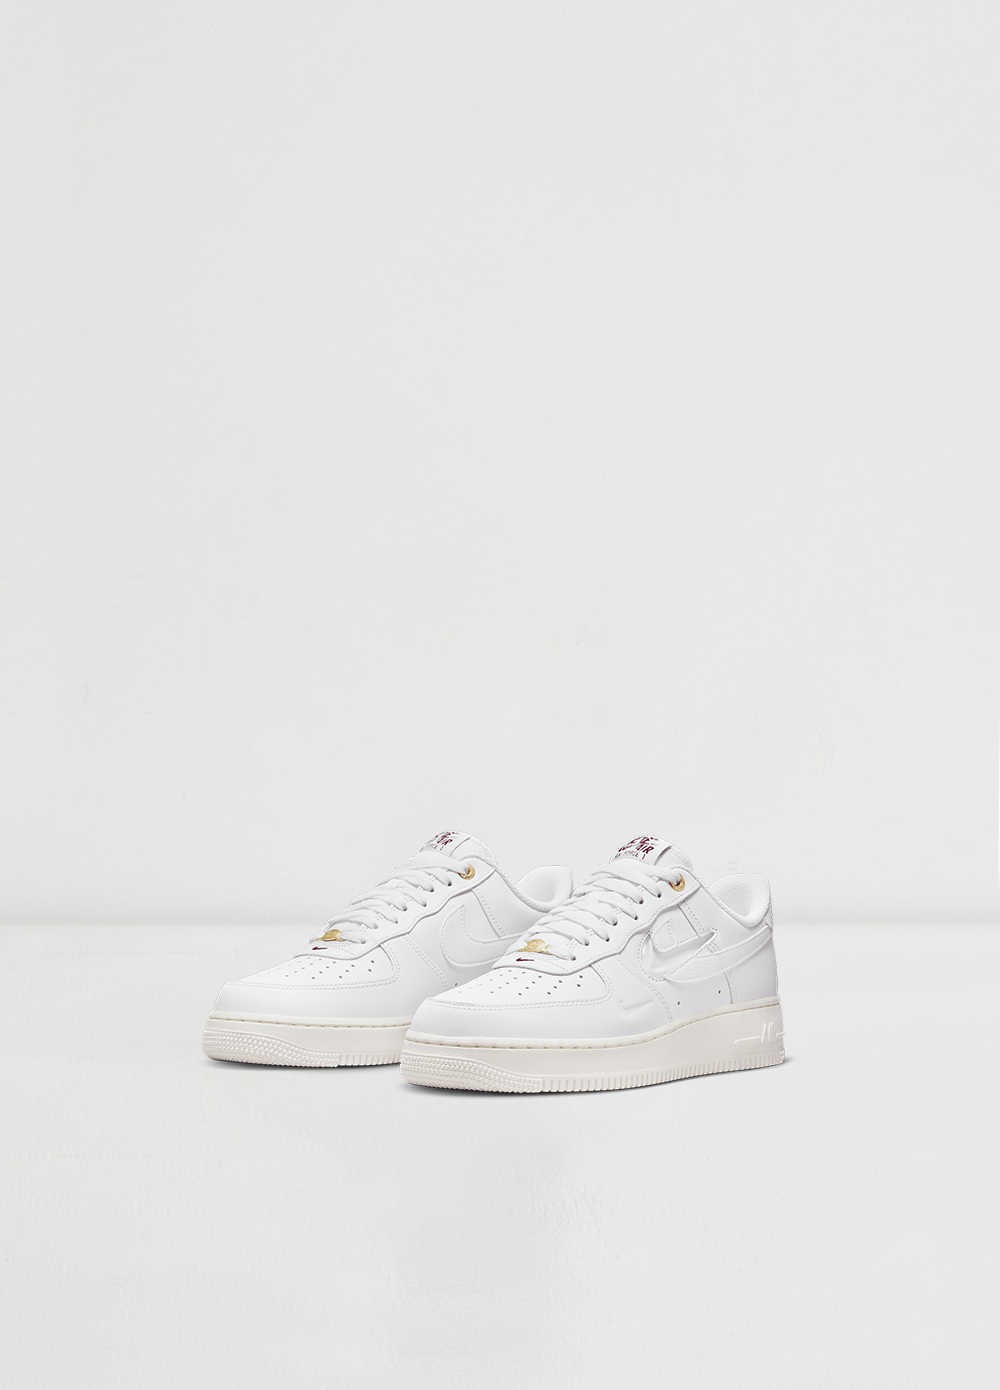 Air Force 1 '07 PRM 'Join Forces' Sneakers